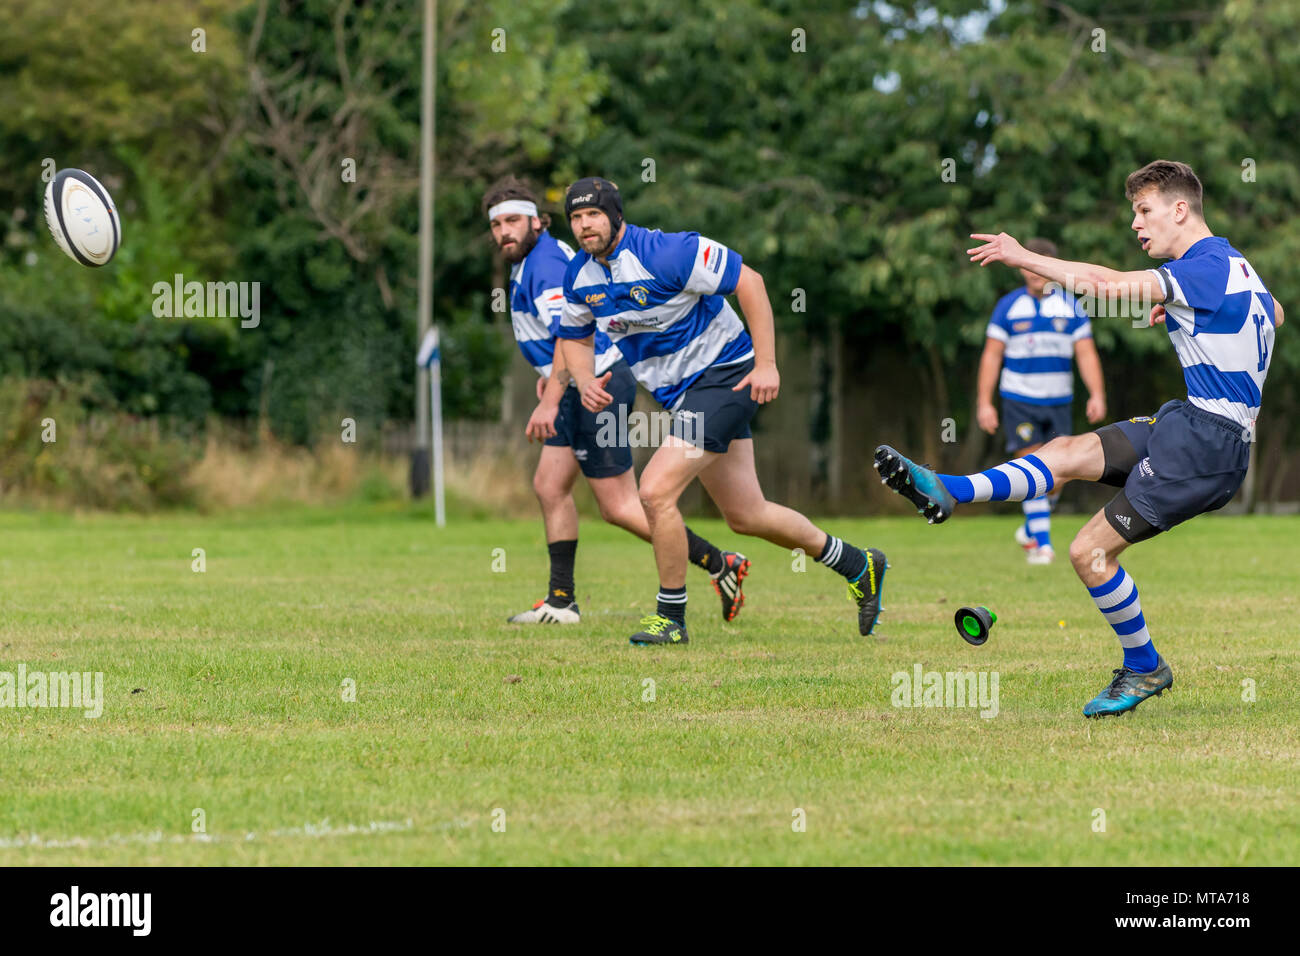 19 year old rugby player kicks ball for conversion, with teammates running forwards to chase the ball. The kicker, kicking tee and ball in shot. Stock Photo